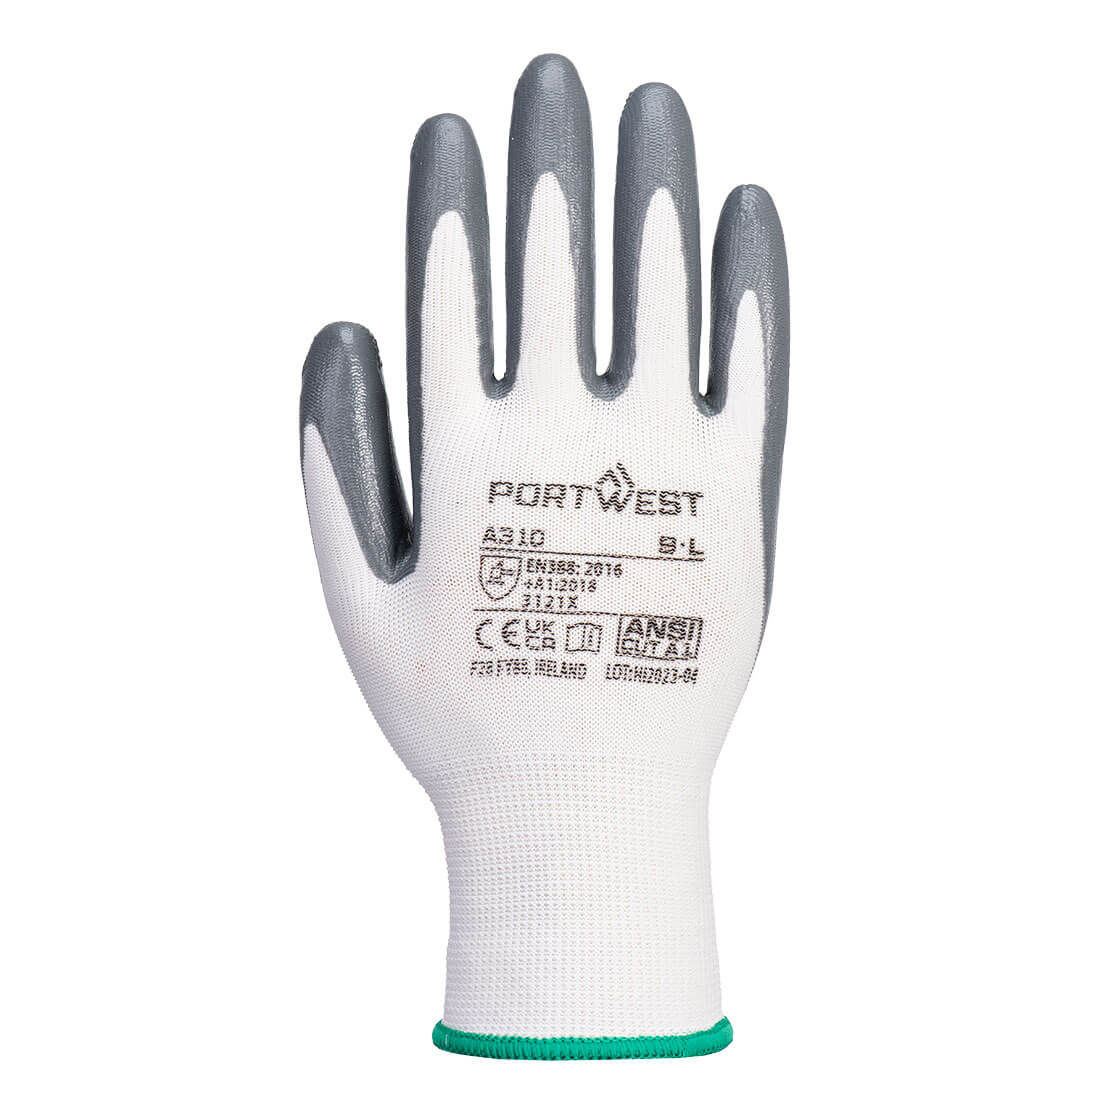 Free Shipping New Portwest A315 All-Flex Full Nitrile Dipped Grip Gloves 